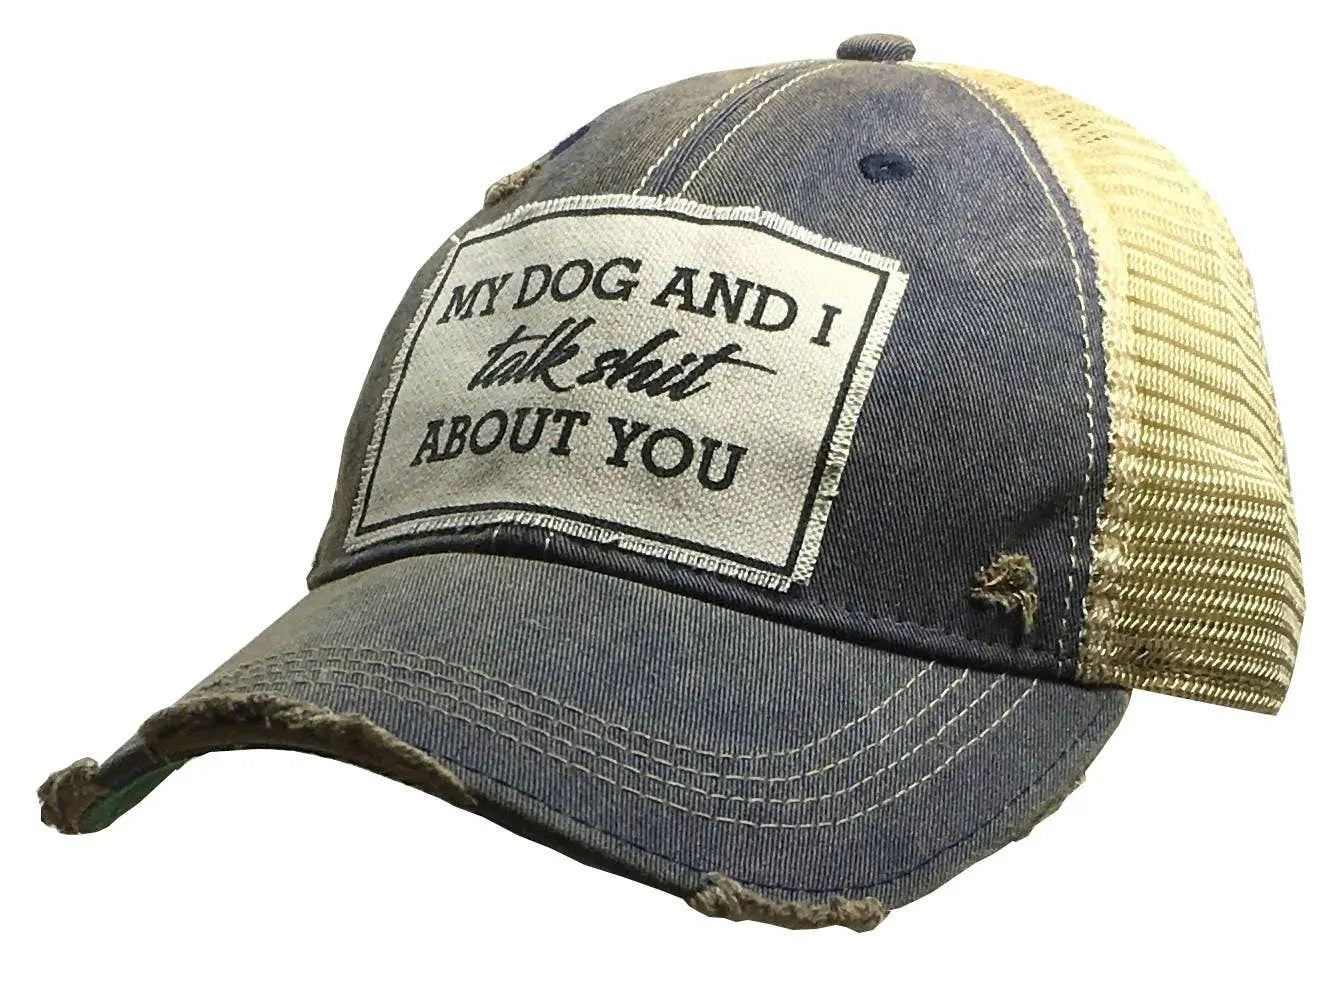 My Dog And I Talk Shit About You Trucker Hat Baseball Cap - Bay-Tique